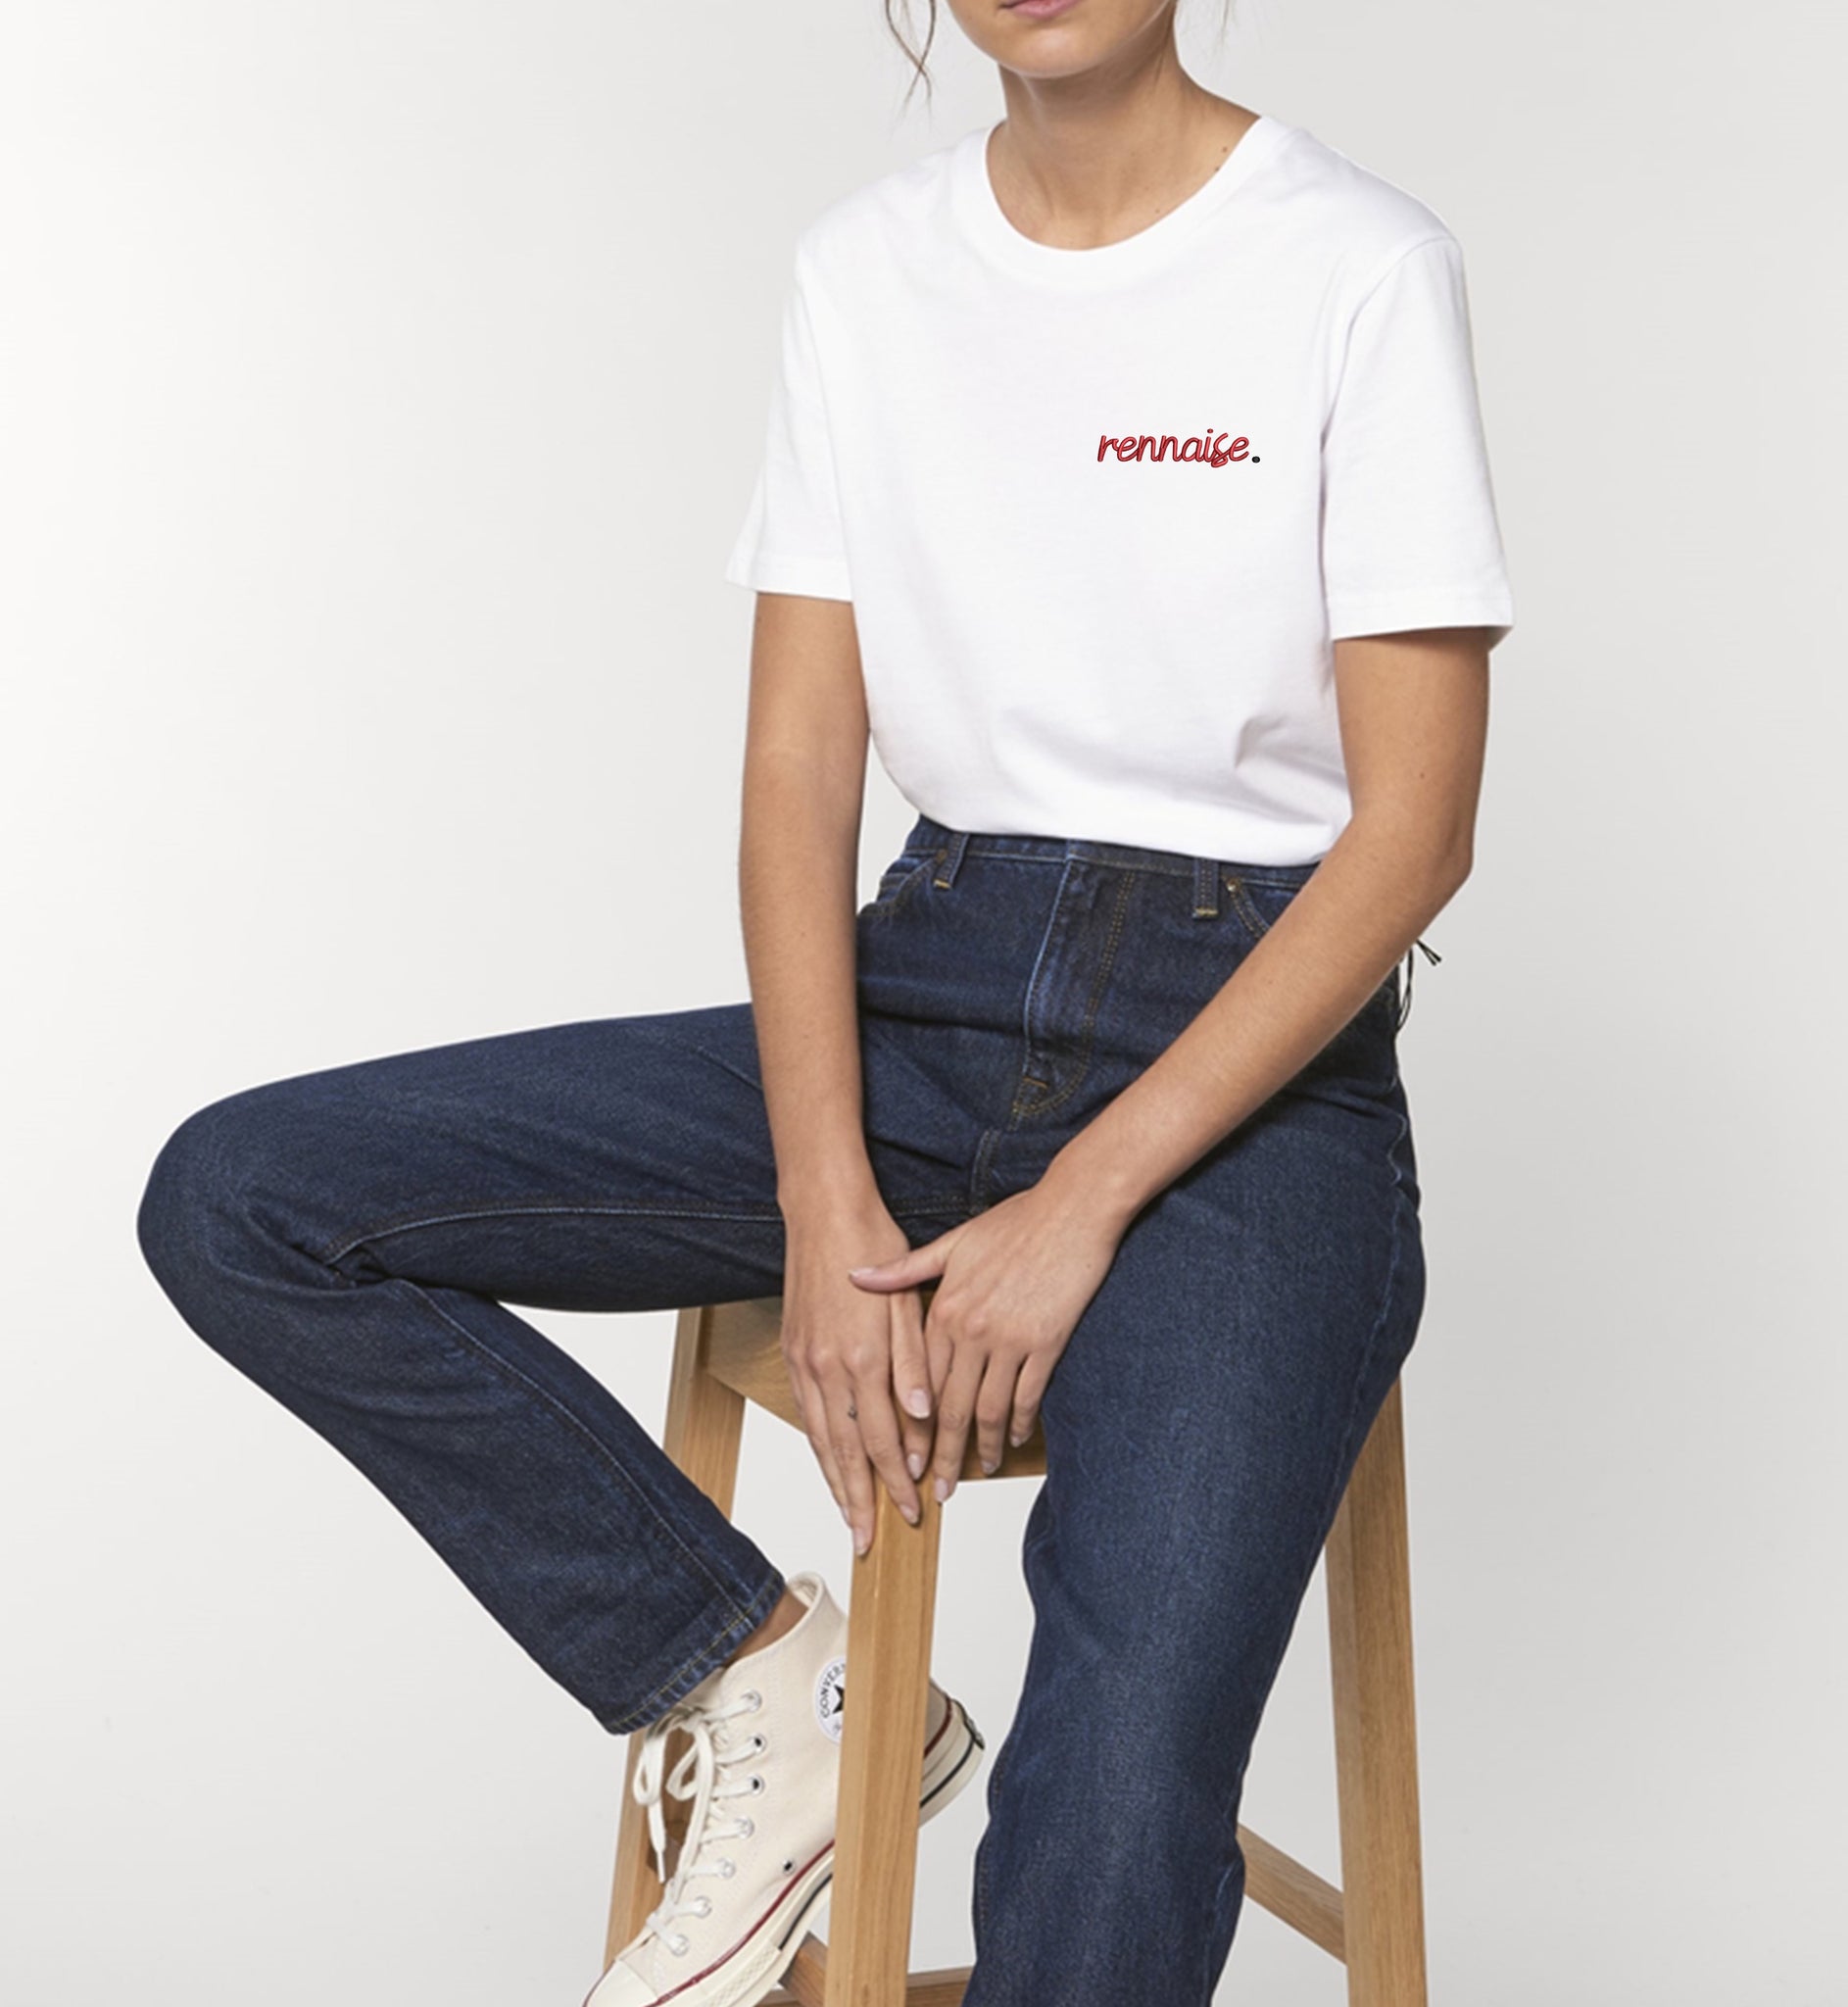 Rennes Embroidered Tee Shirt.